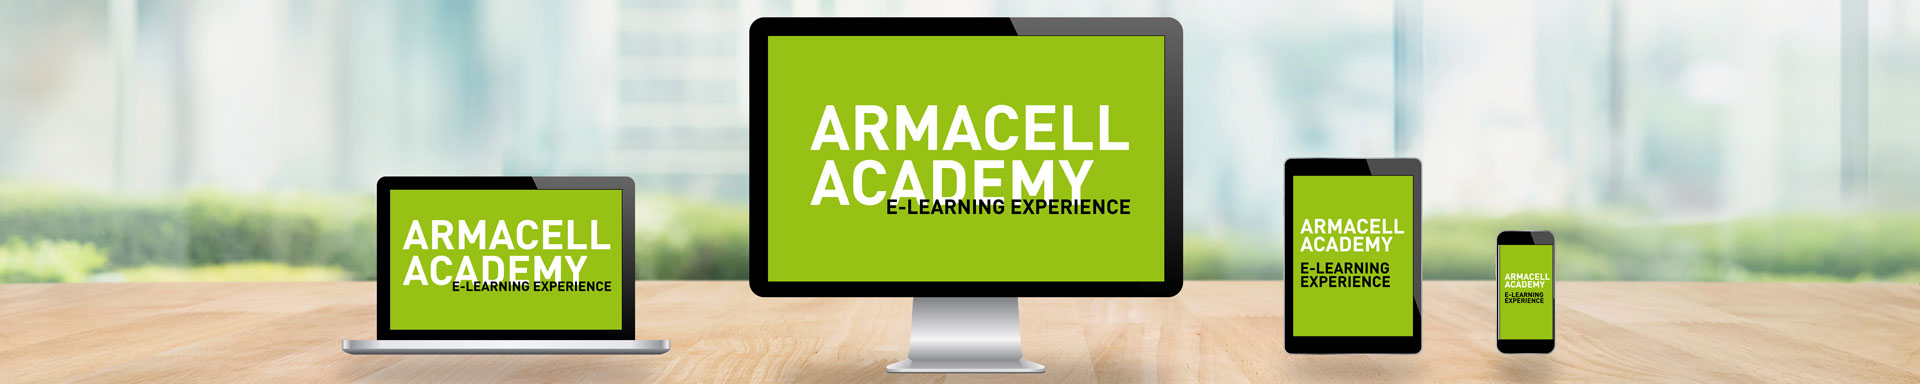 Armacell Academy is free to eligible Armacell customers